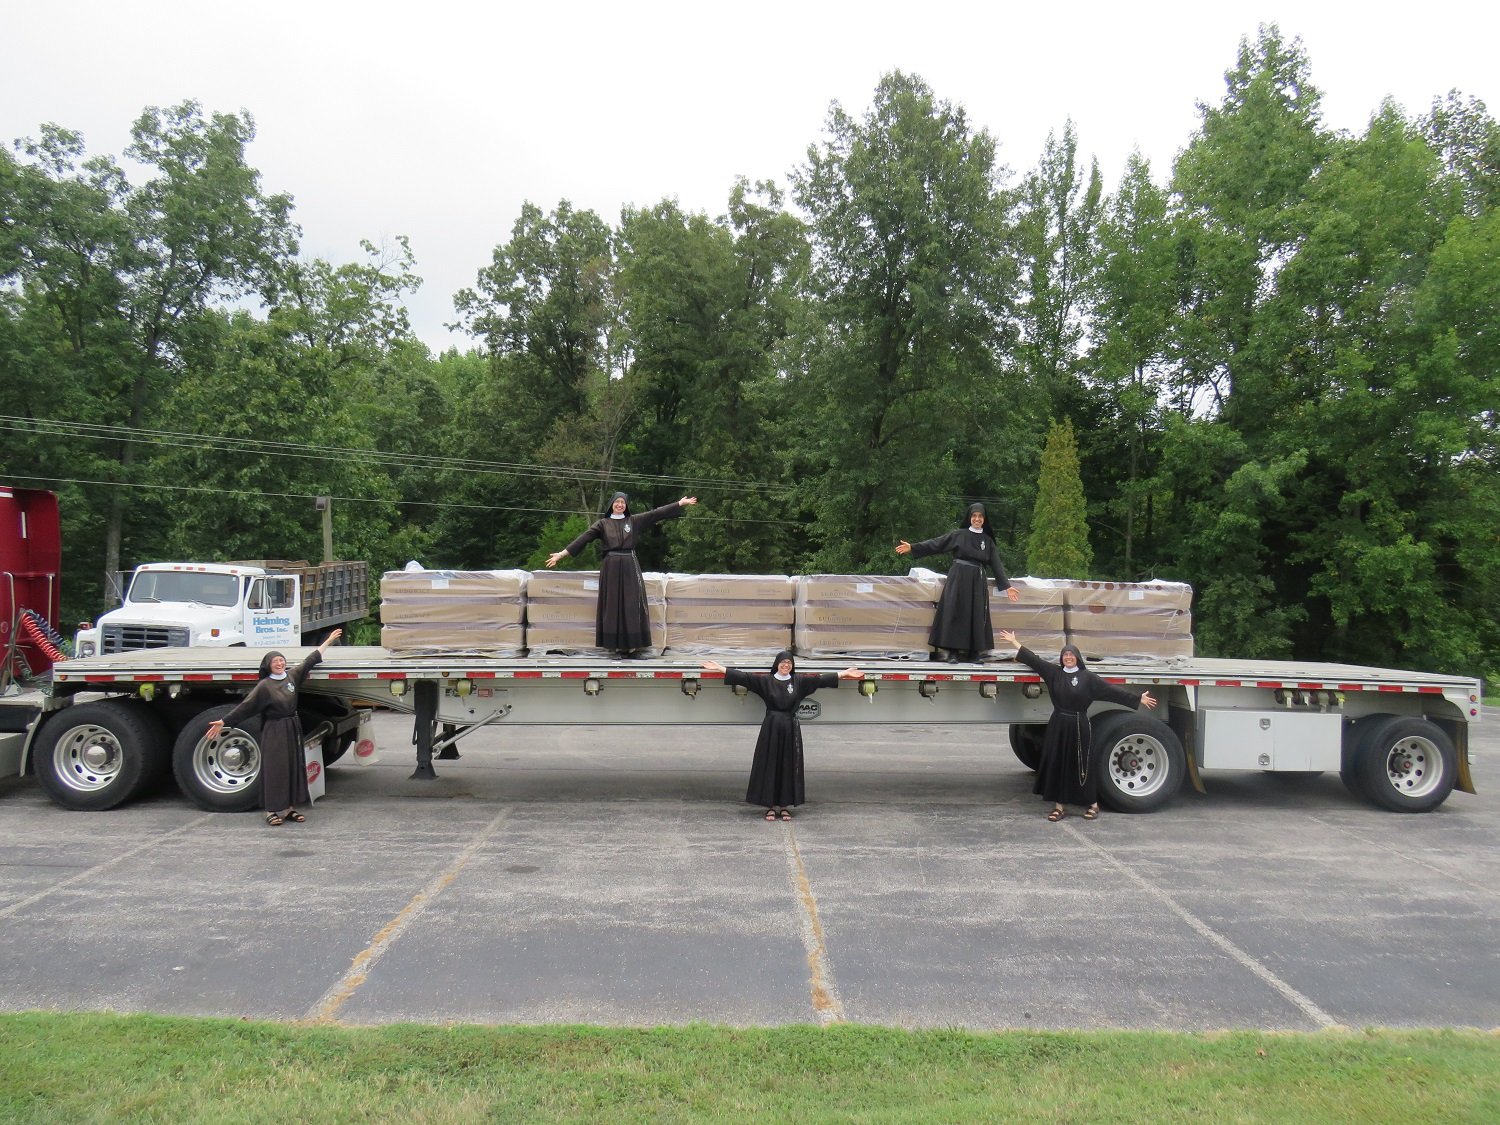  August 15 - the last shipment of roof tiles has arrived! 